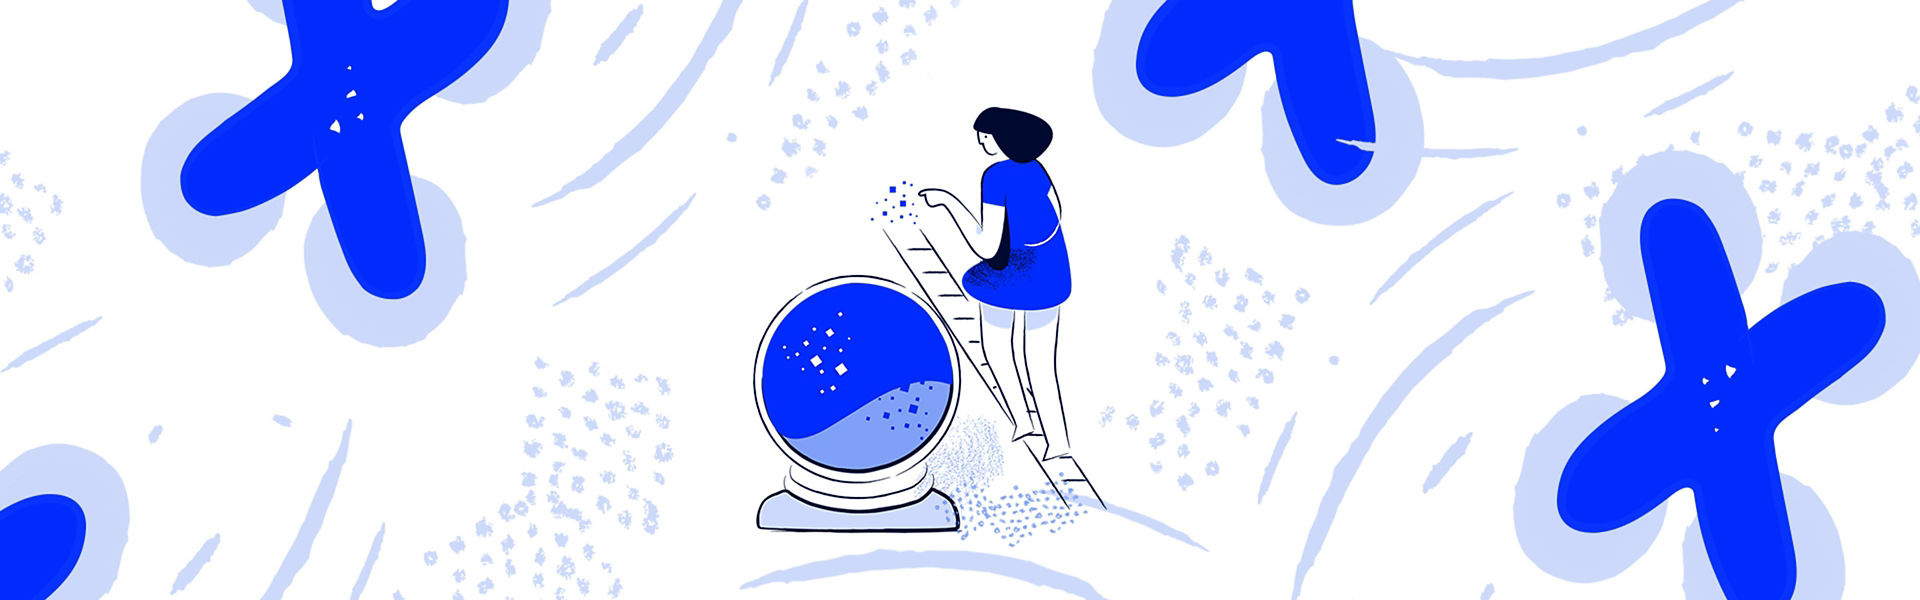 An illustration depicting a person climbing a ladder leaning on a blue crystal ball